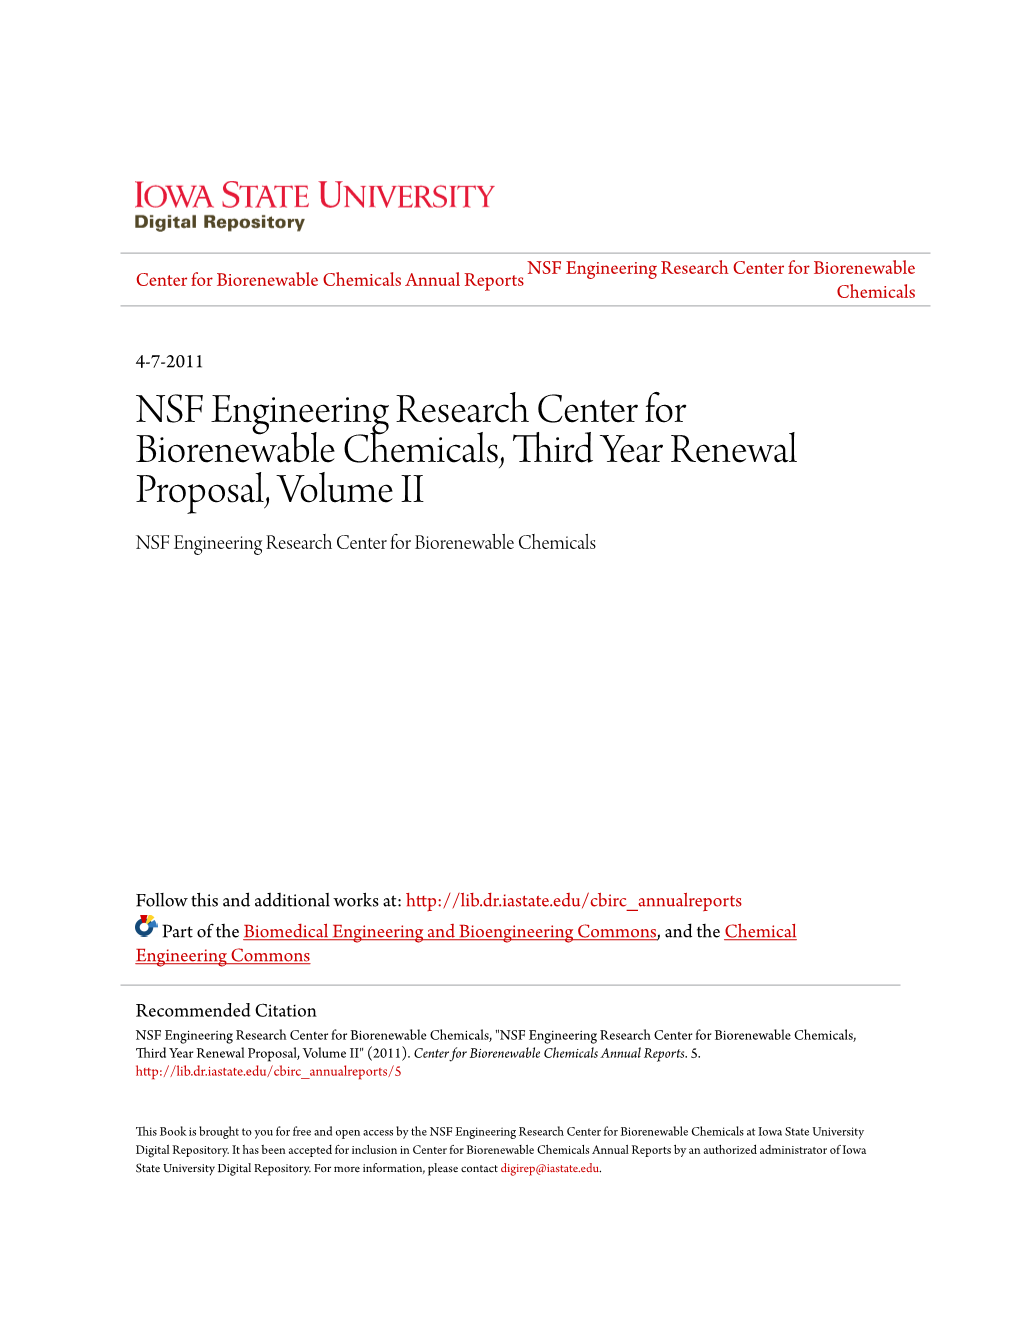 NSF Engineering Research Center for Biorenewable Chemicals, Third Year Renewal Proposal, Volume II NSF Engineering Research Center for Biorenewable Chemicals